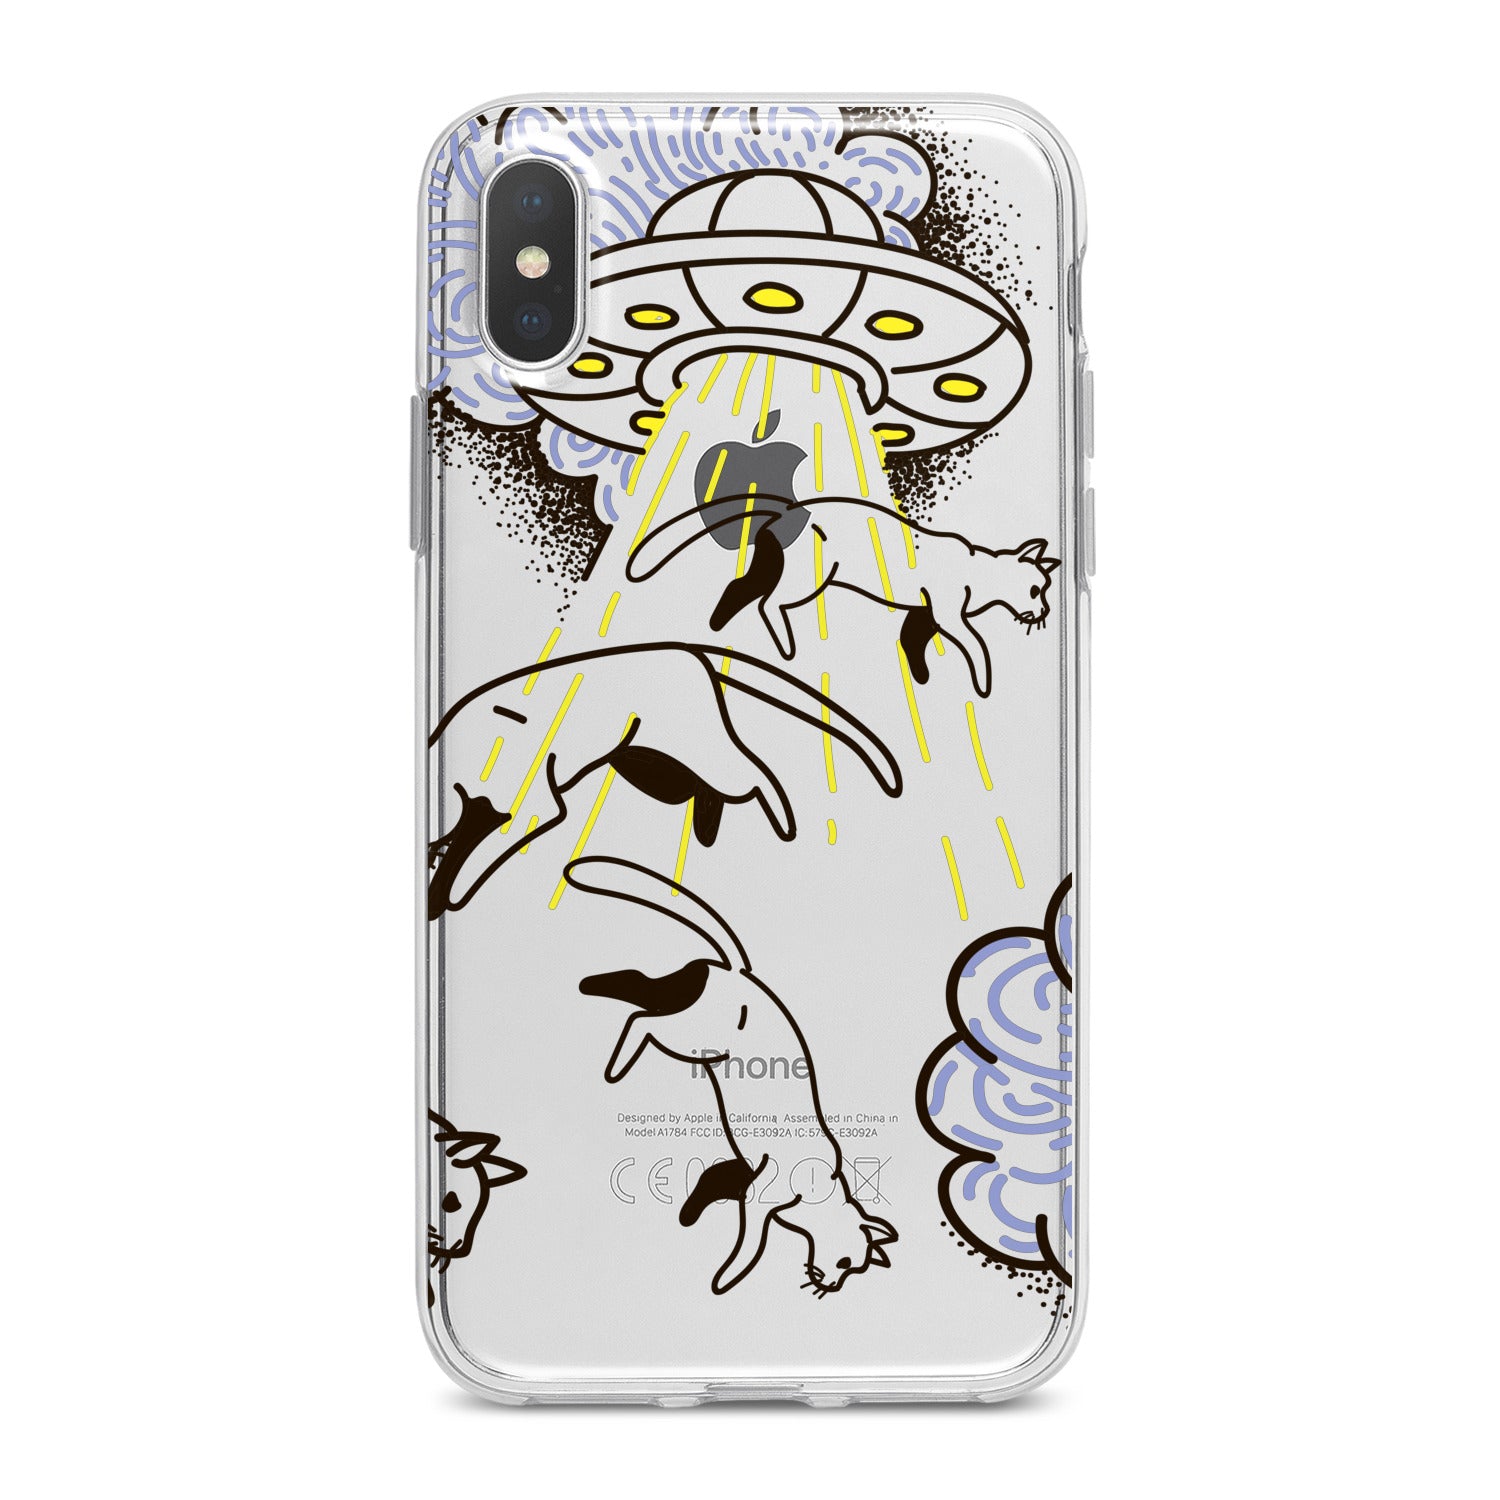 Lex Altern Alien Cats Phone Case for your iPhone & Android phone.